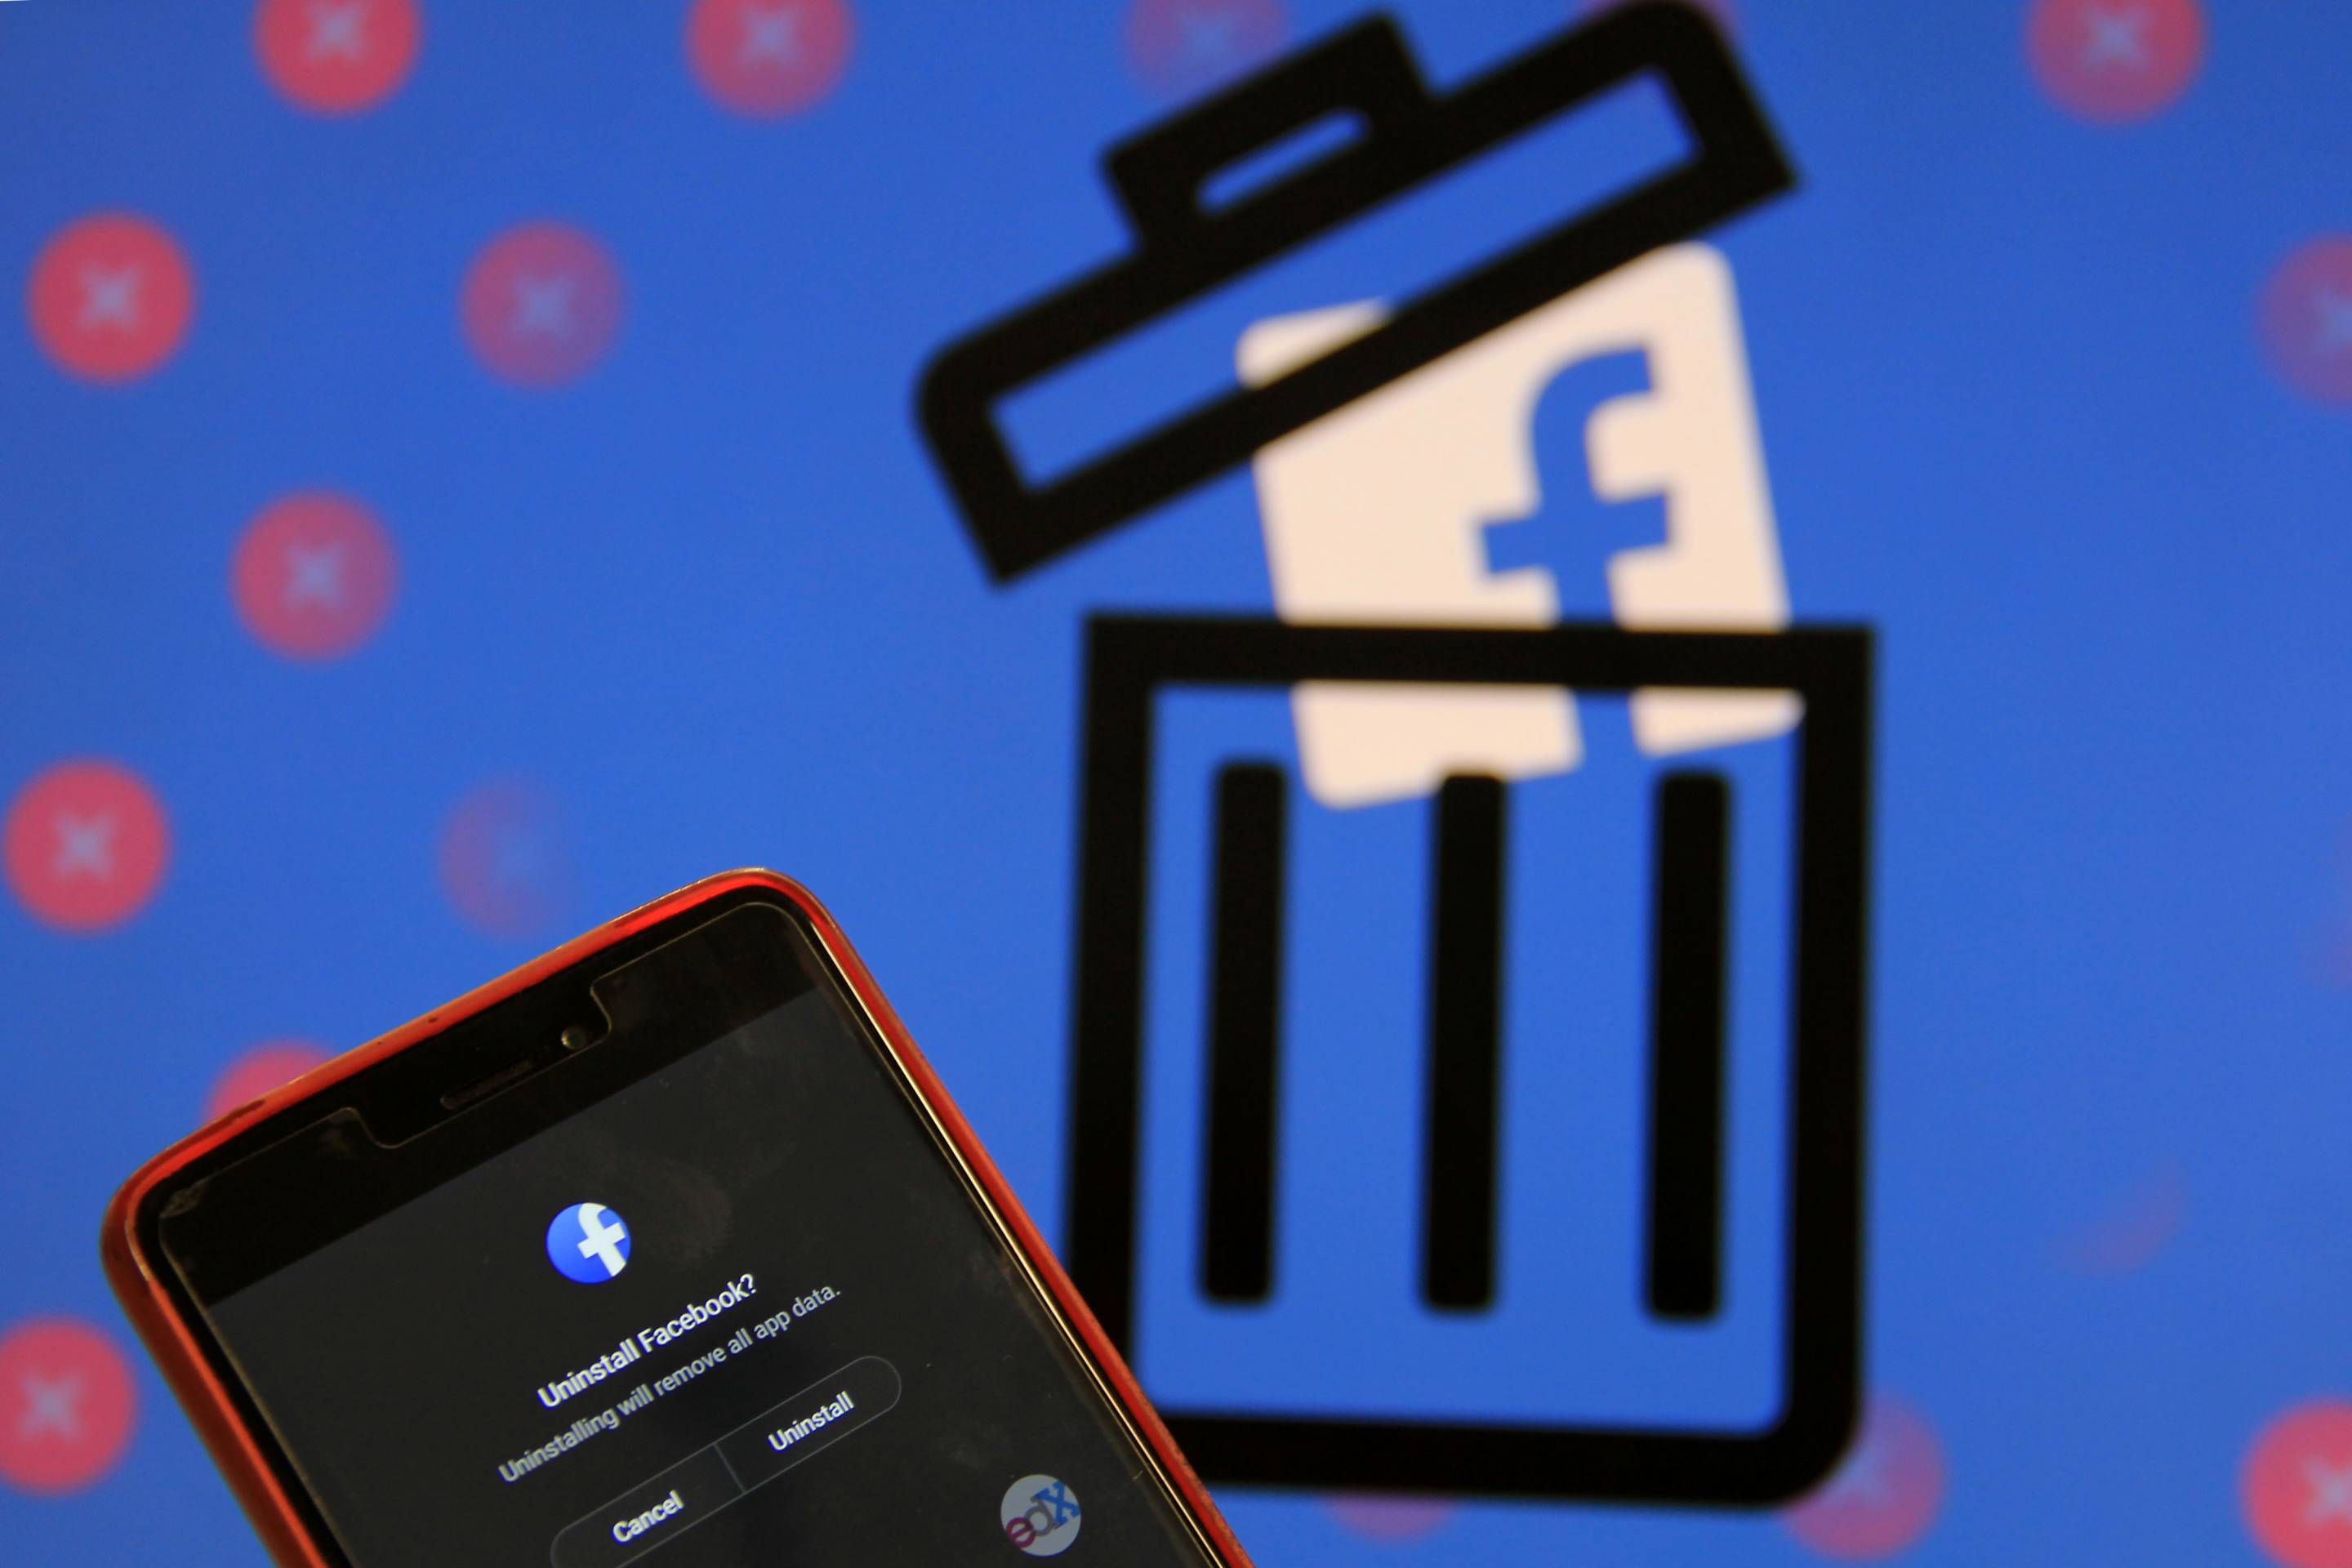 Long-press the Facebook app icon on your device.
Select Uninstall or Remove.